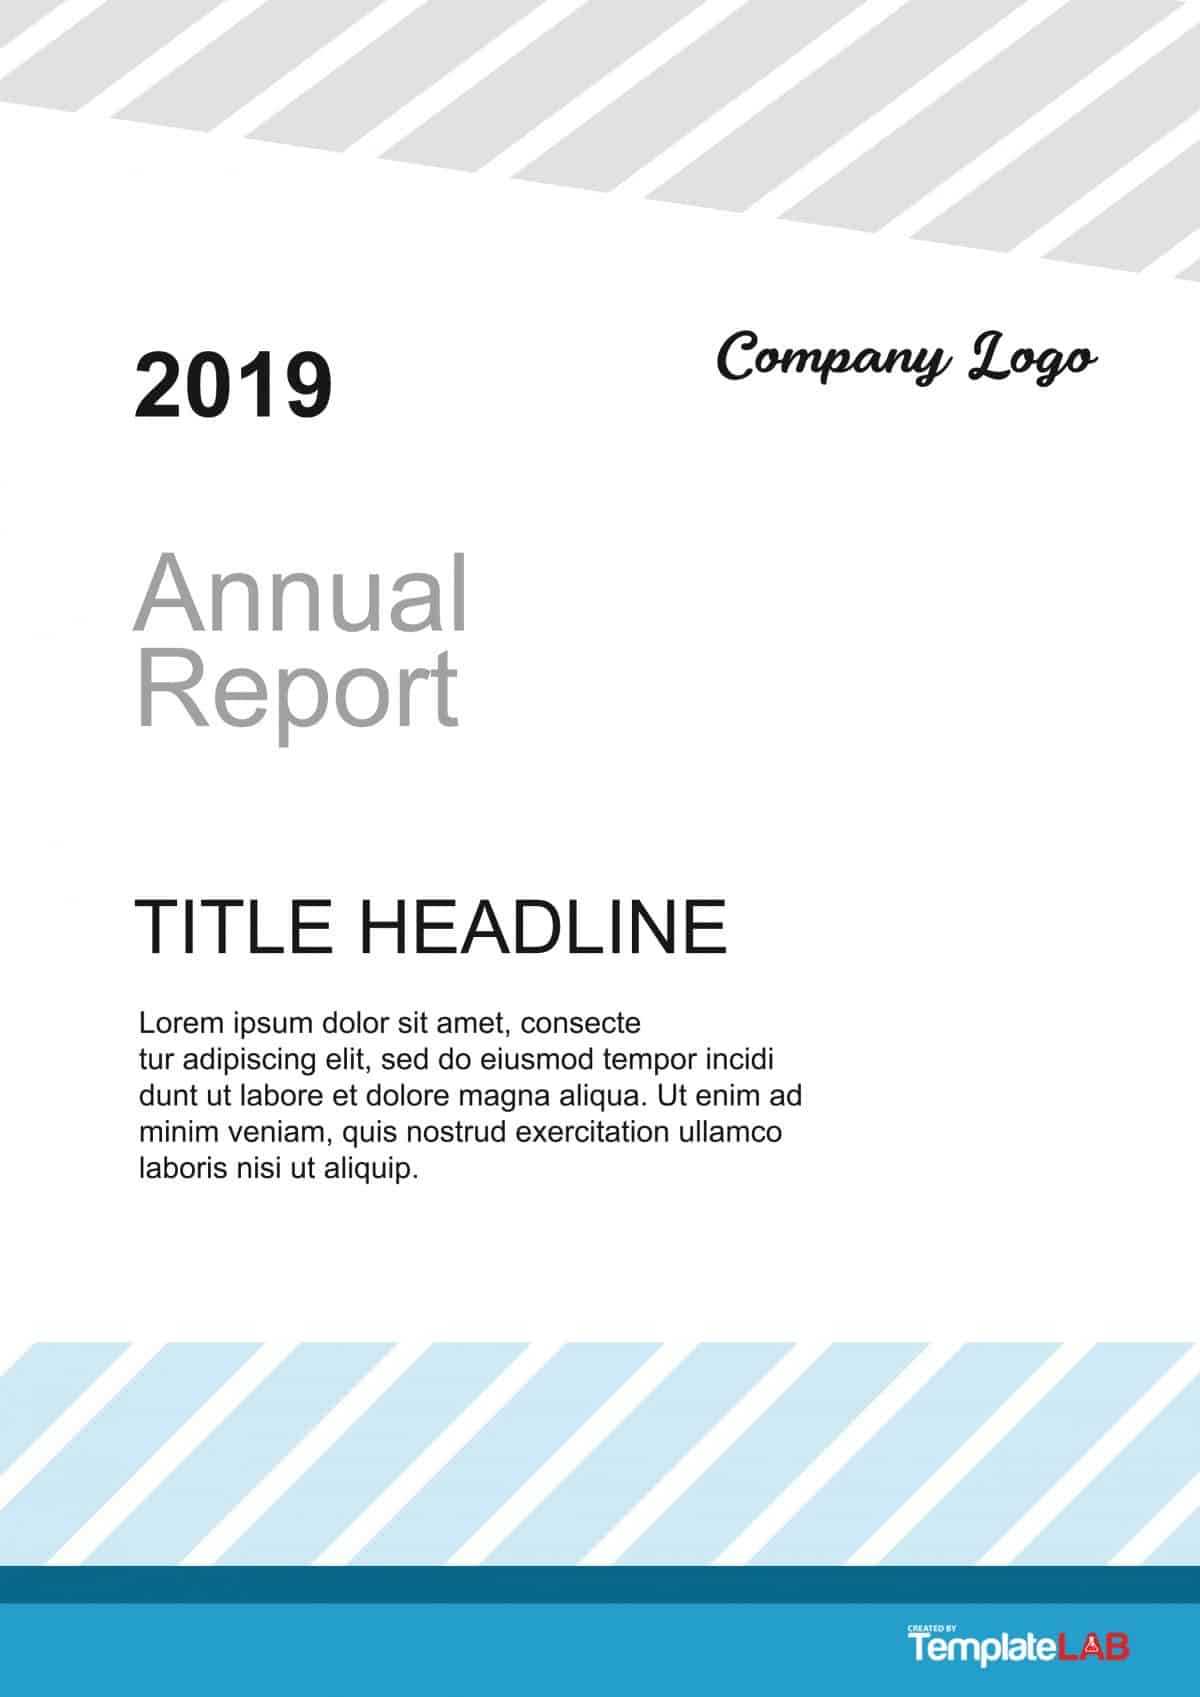 Technical Report Cover Page Template - Business Template Ideas Within Technical Report Cover Page Template